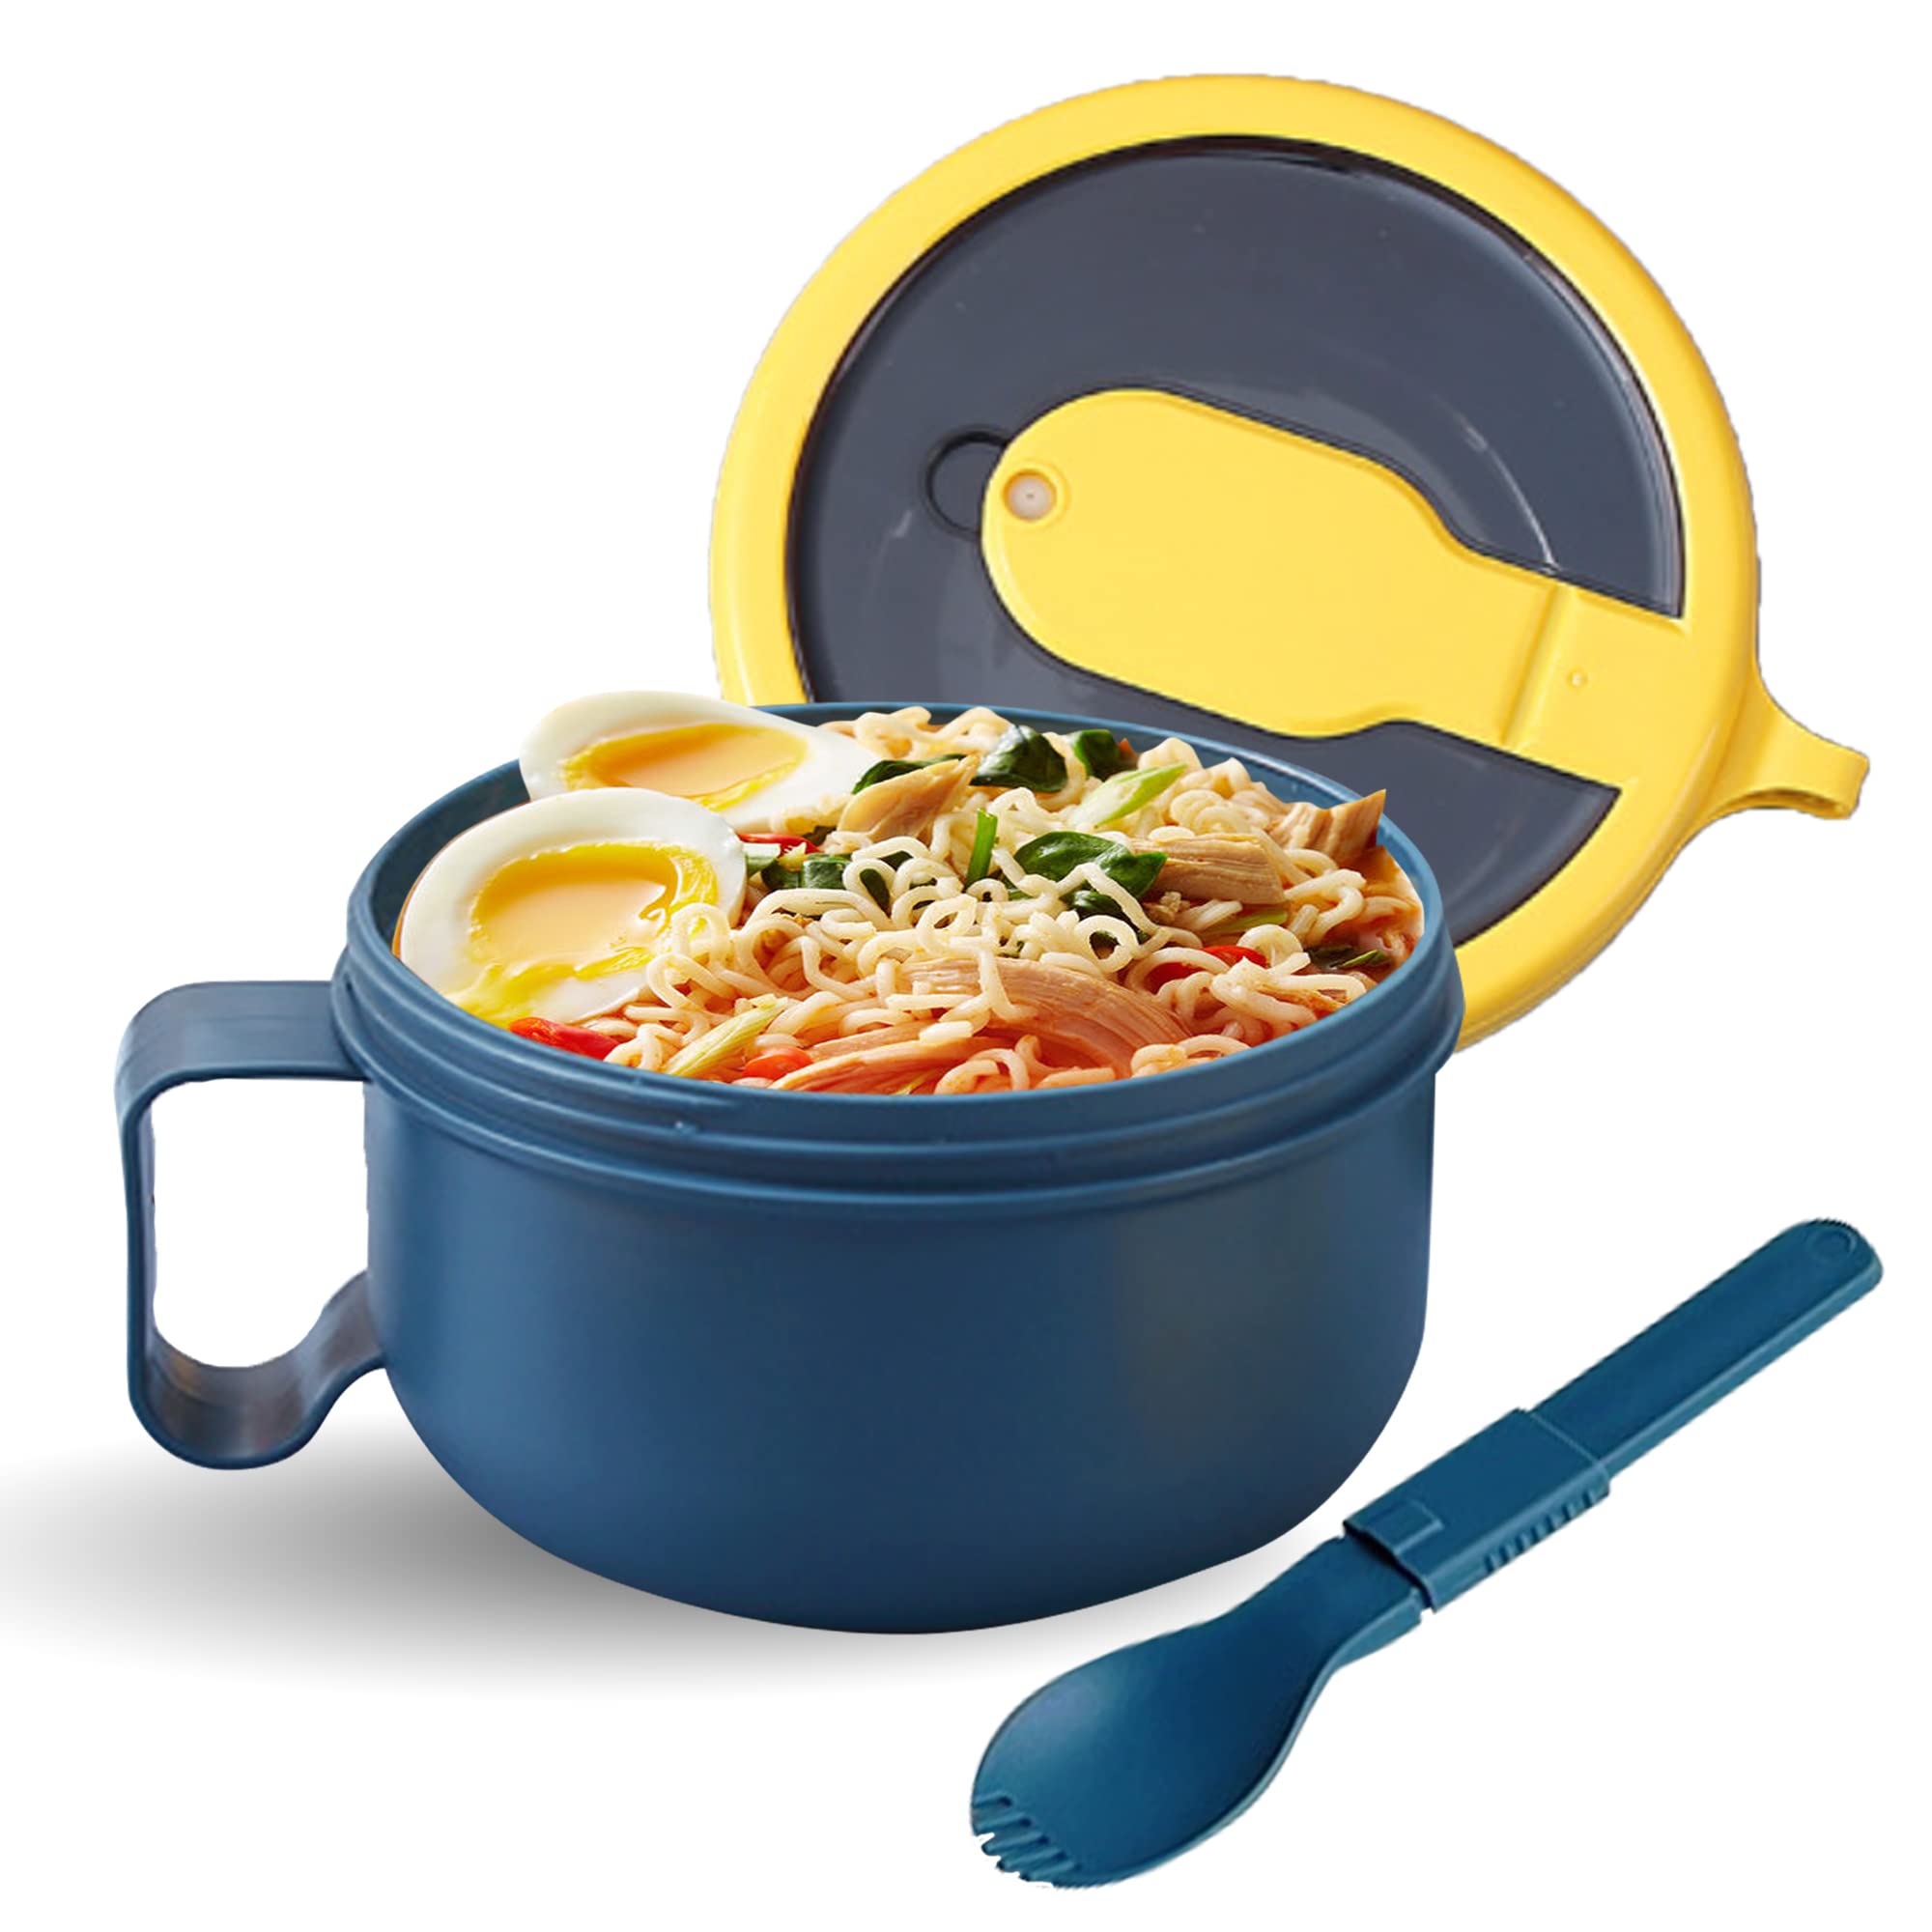 Microwave Ramen Bowl Set, Noodle Bowls With Lid And Spoon